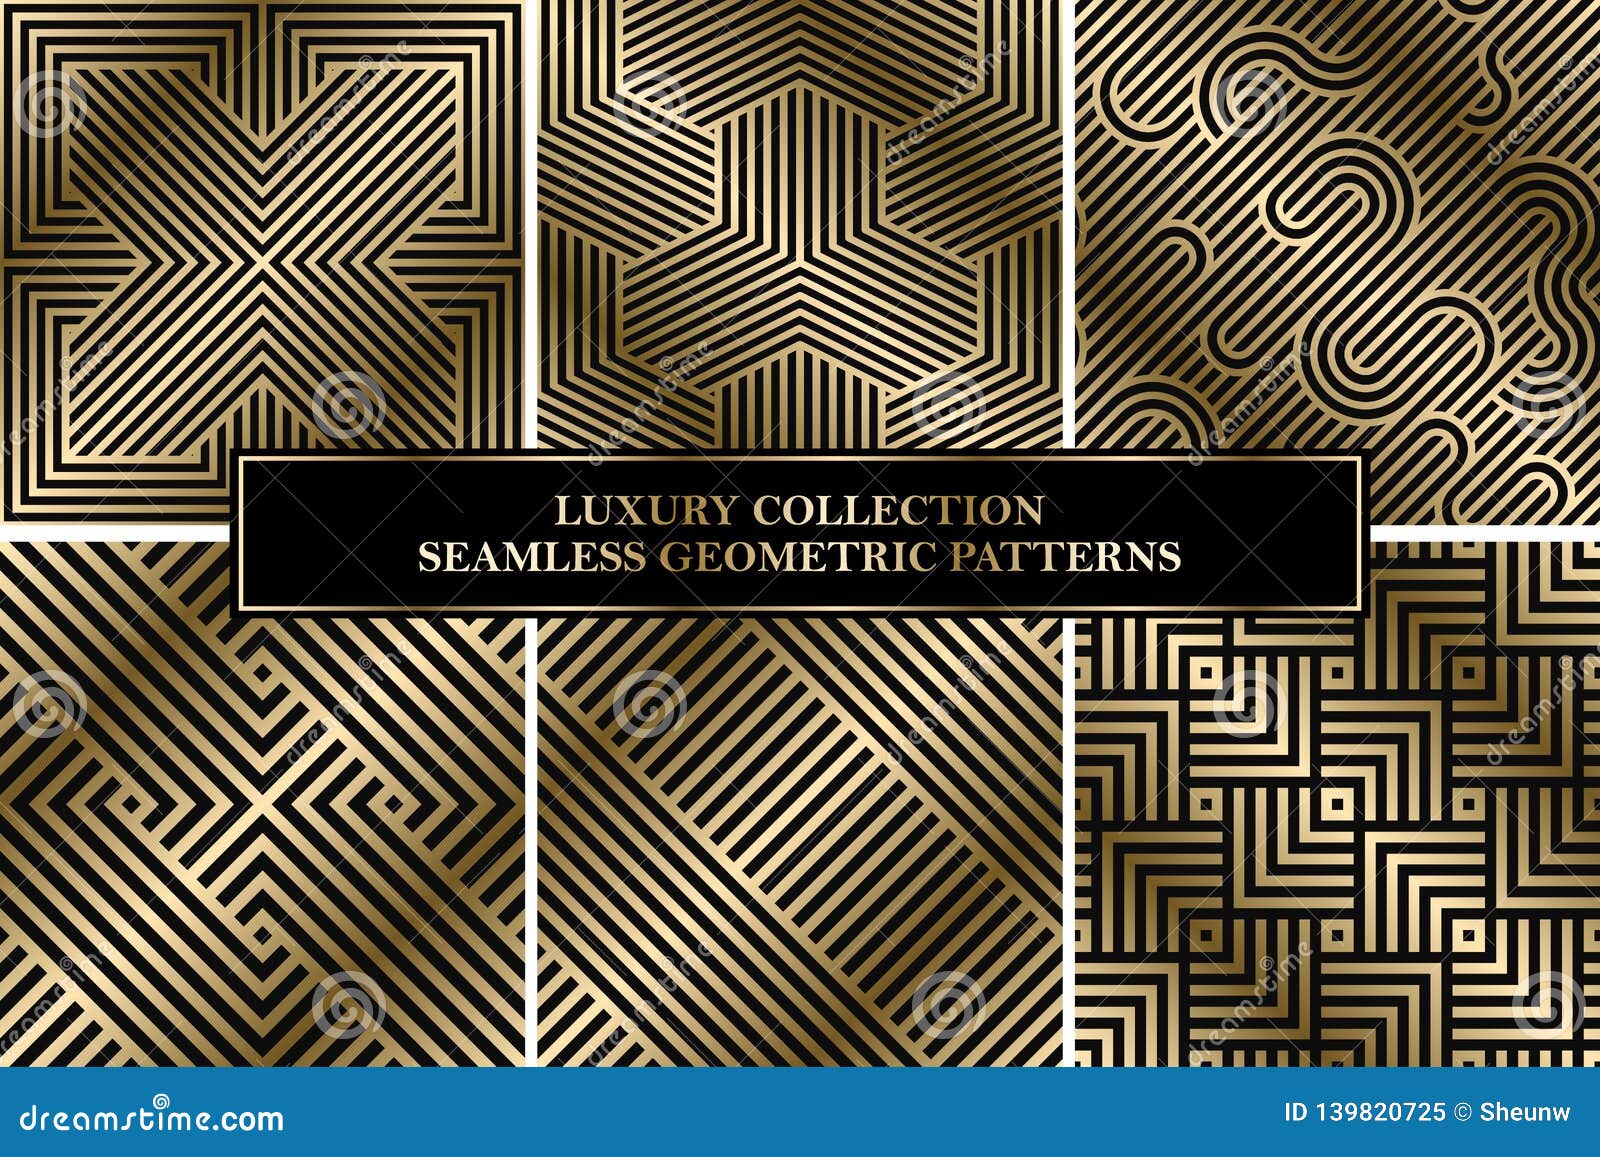 collection of art deco  geometric striped patterns - seamless luxury gold gradient . rich backgrounds.